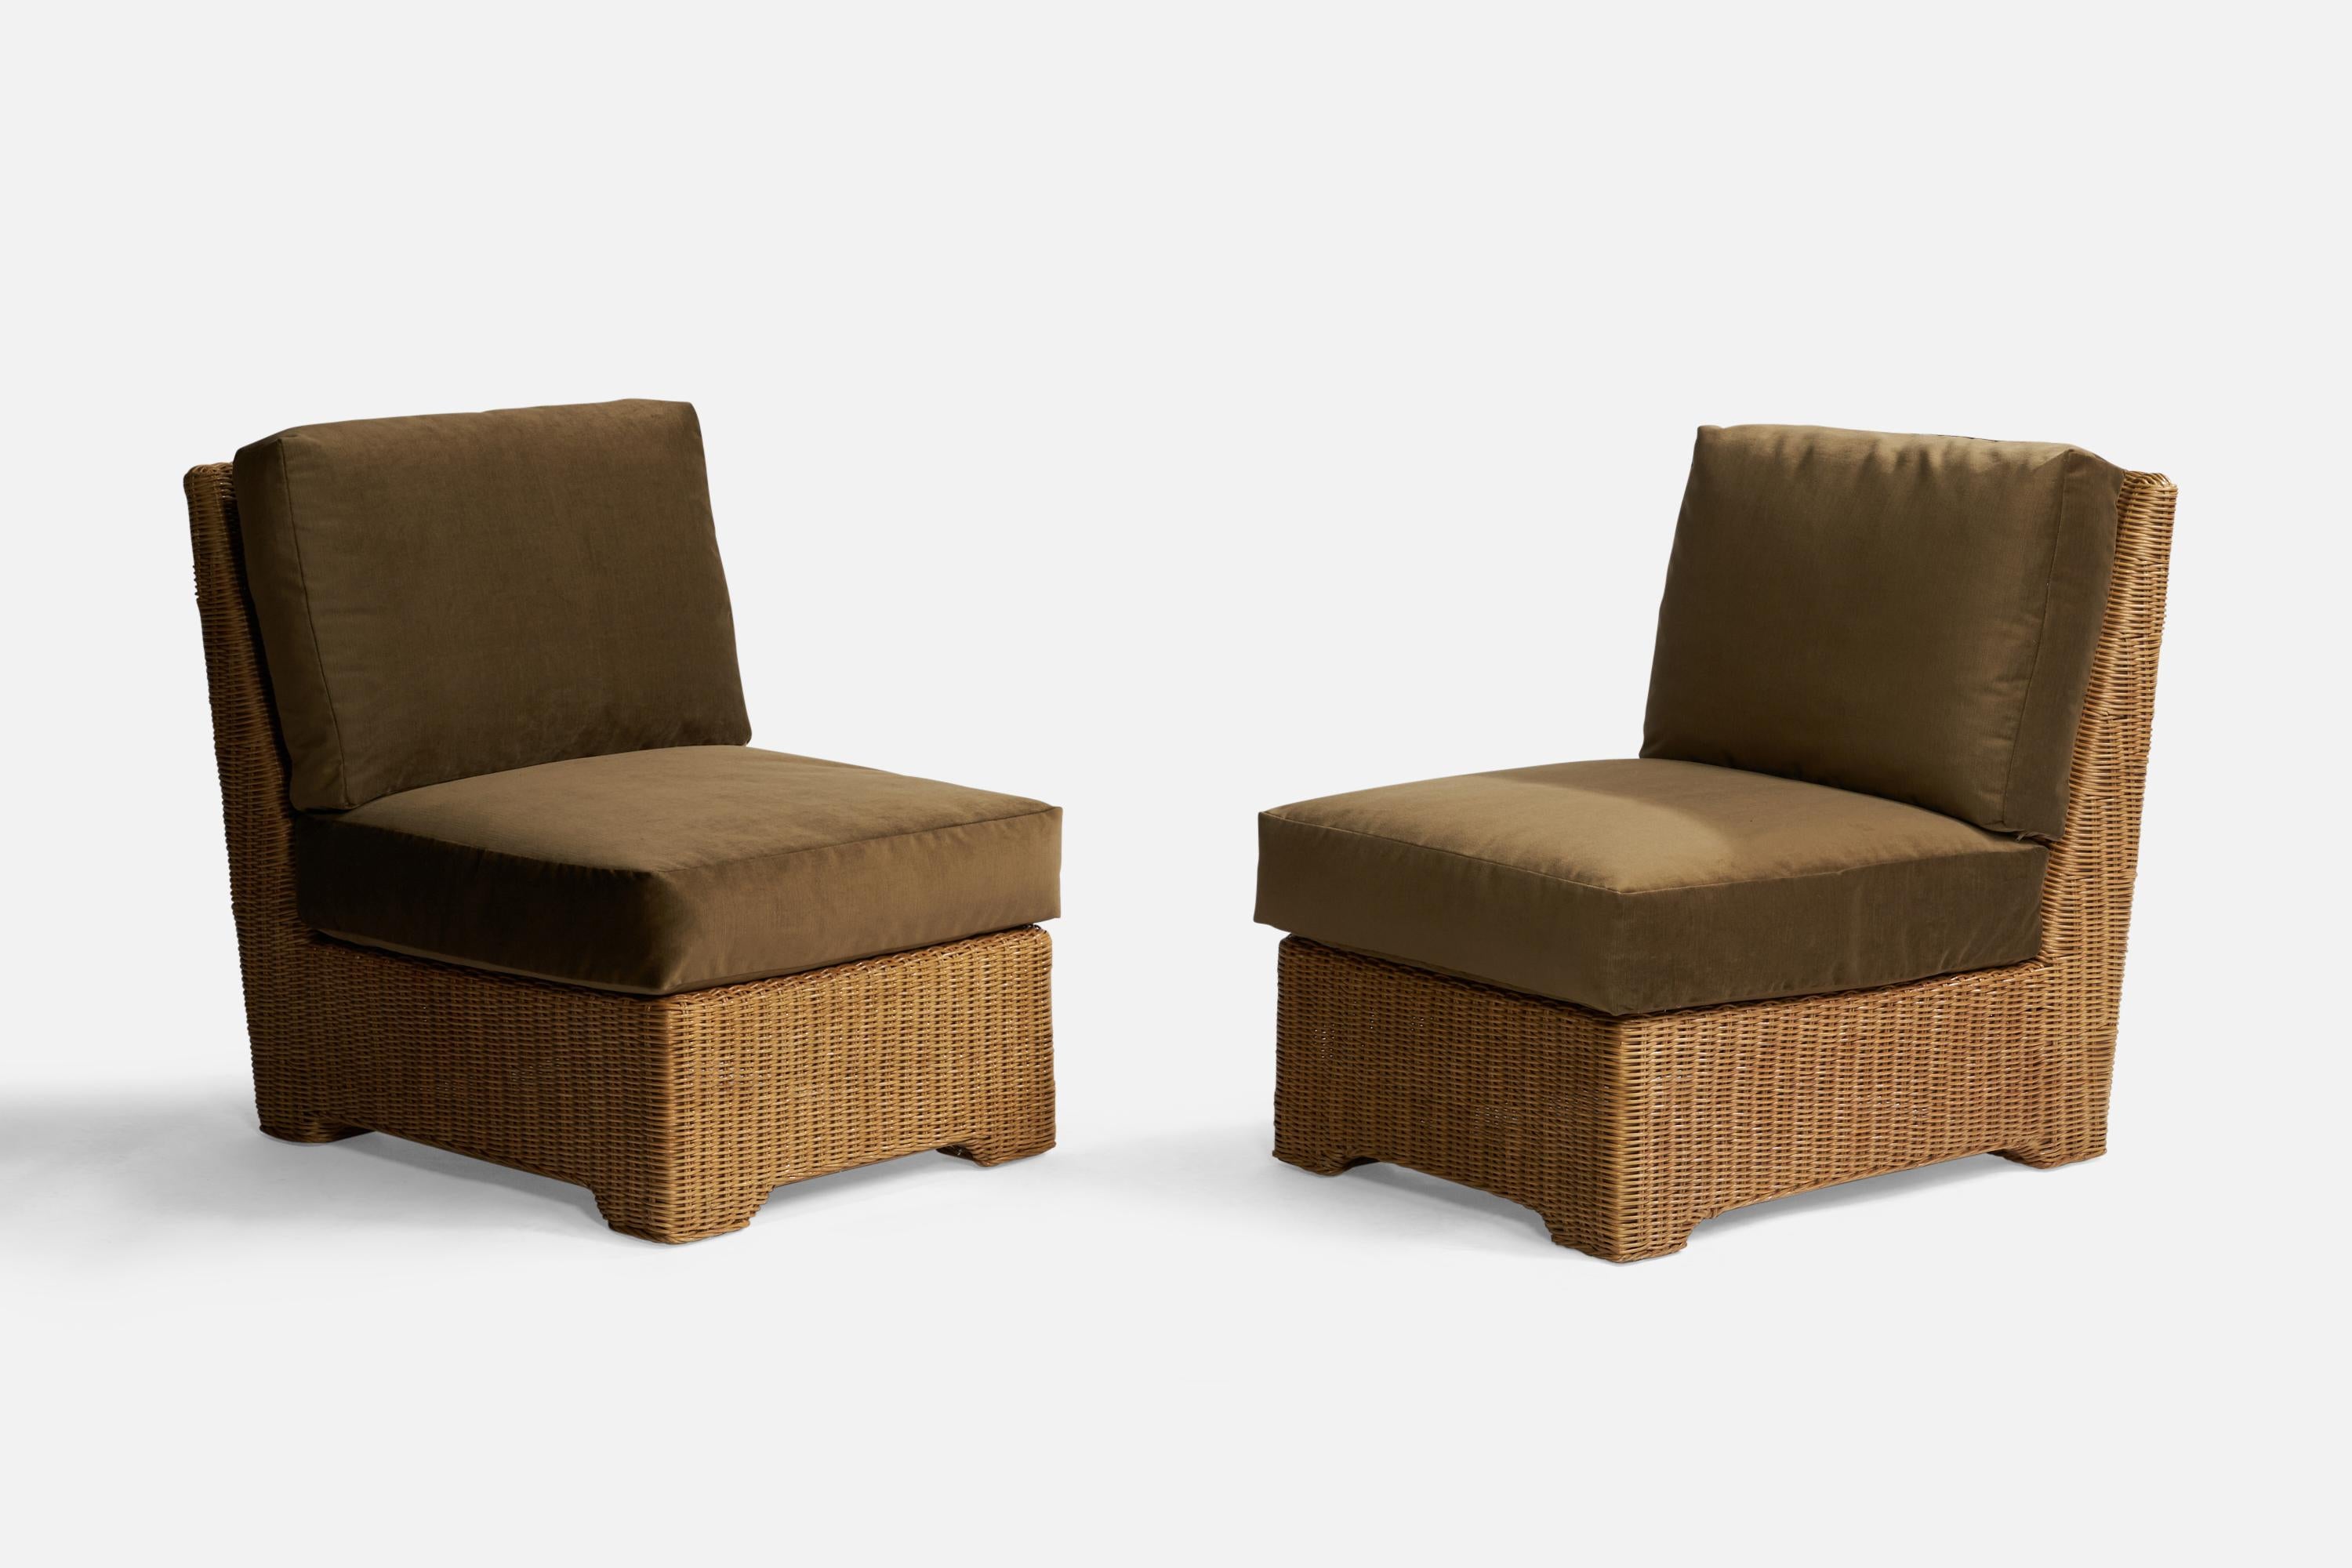 A pair of rattan and green velvet fabric slipper lounge chairs designed and produced in the US, c. 1970s.

Seat height: 18”

Reupholstered in brand new velvet.